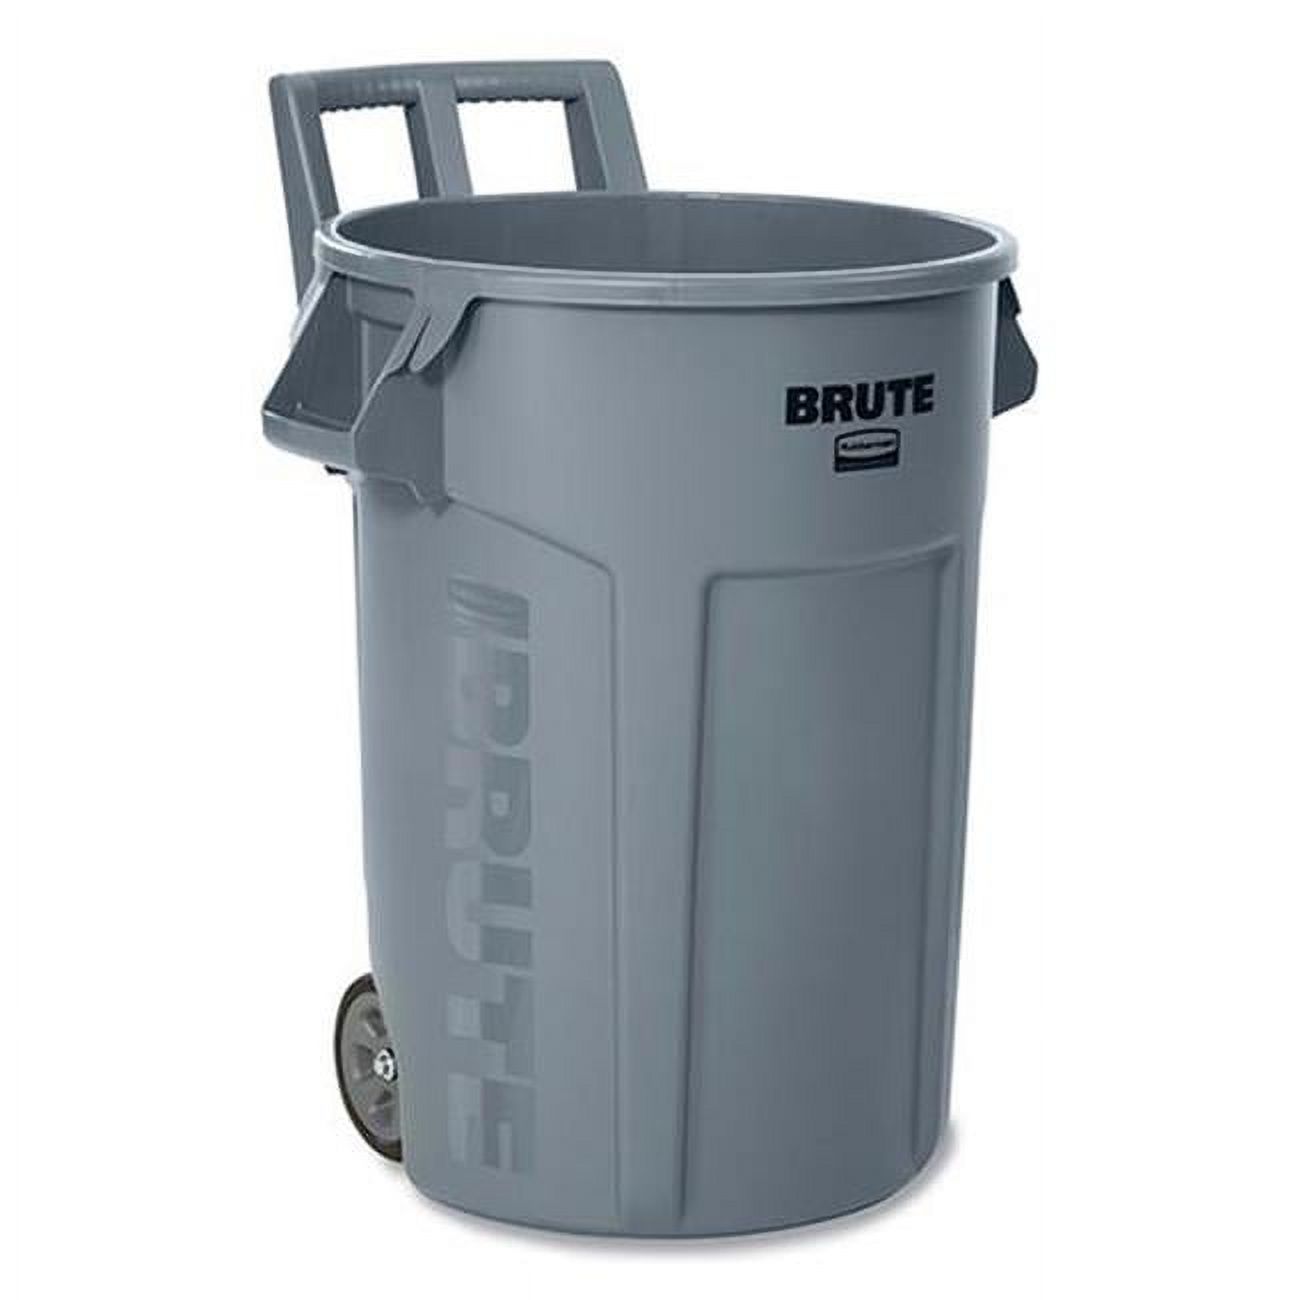 Rubbermaid RCP2179403 32 gal Plastic Vented Wheeled Brute Container Waste Basket, Gray - image 1 of 6